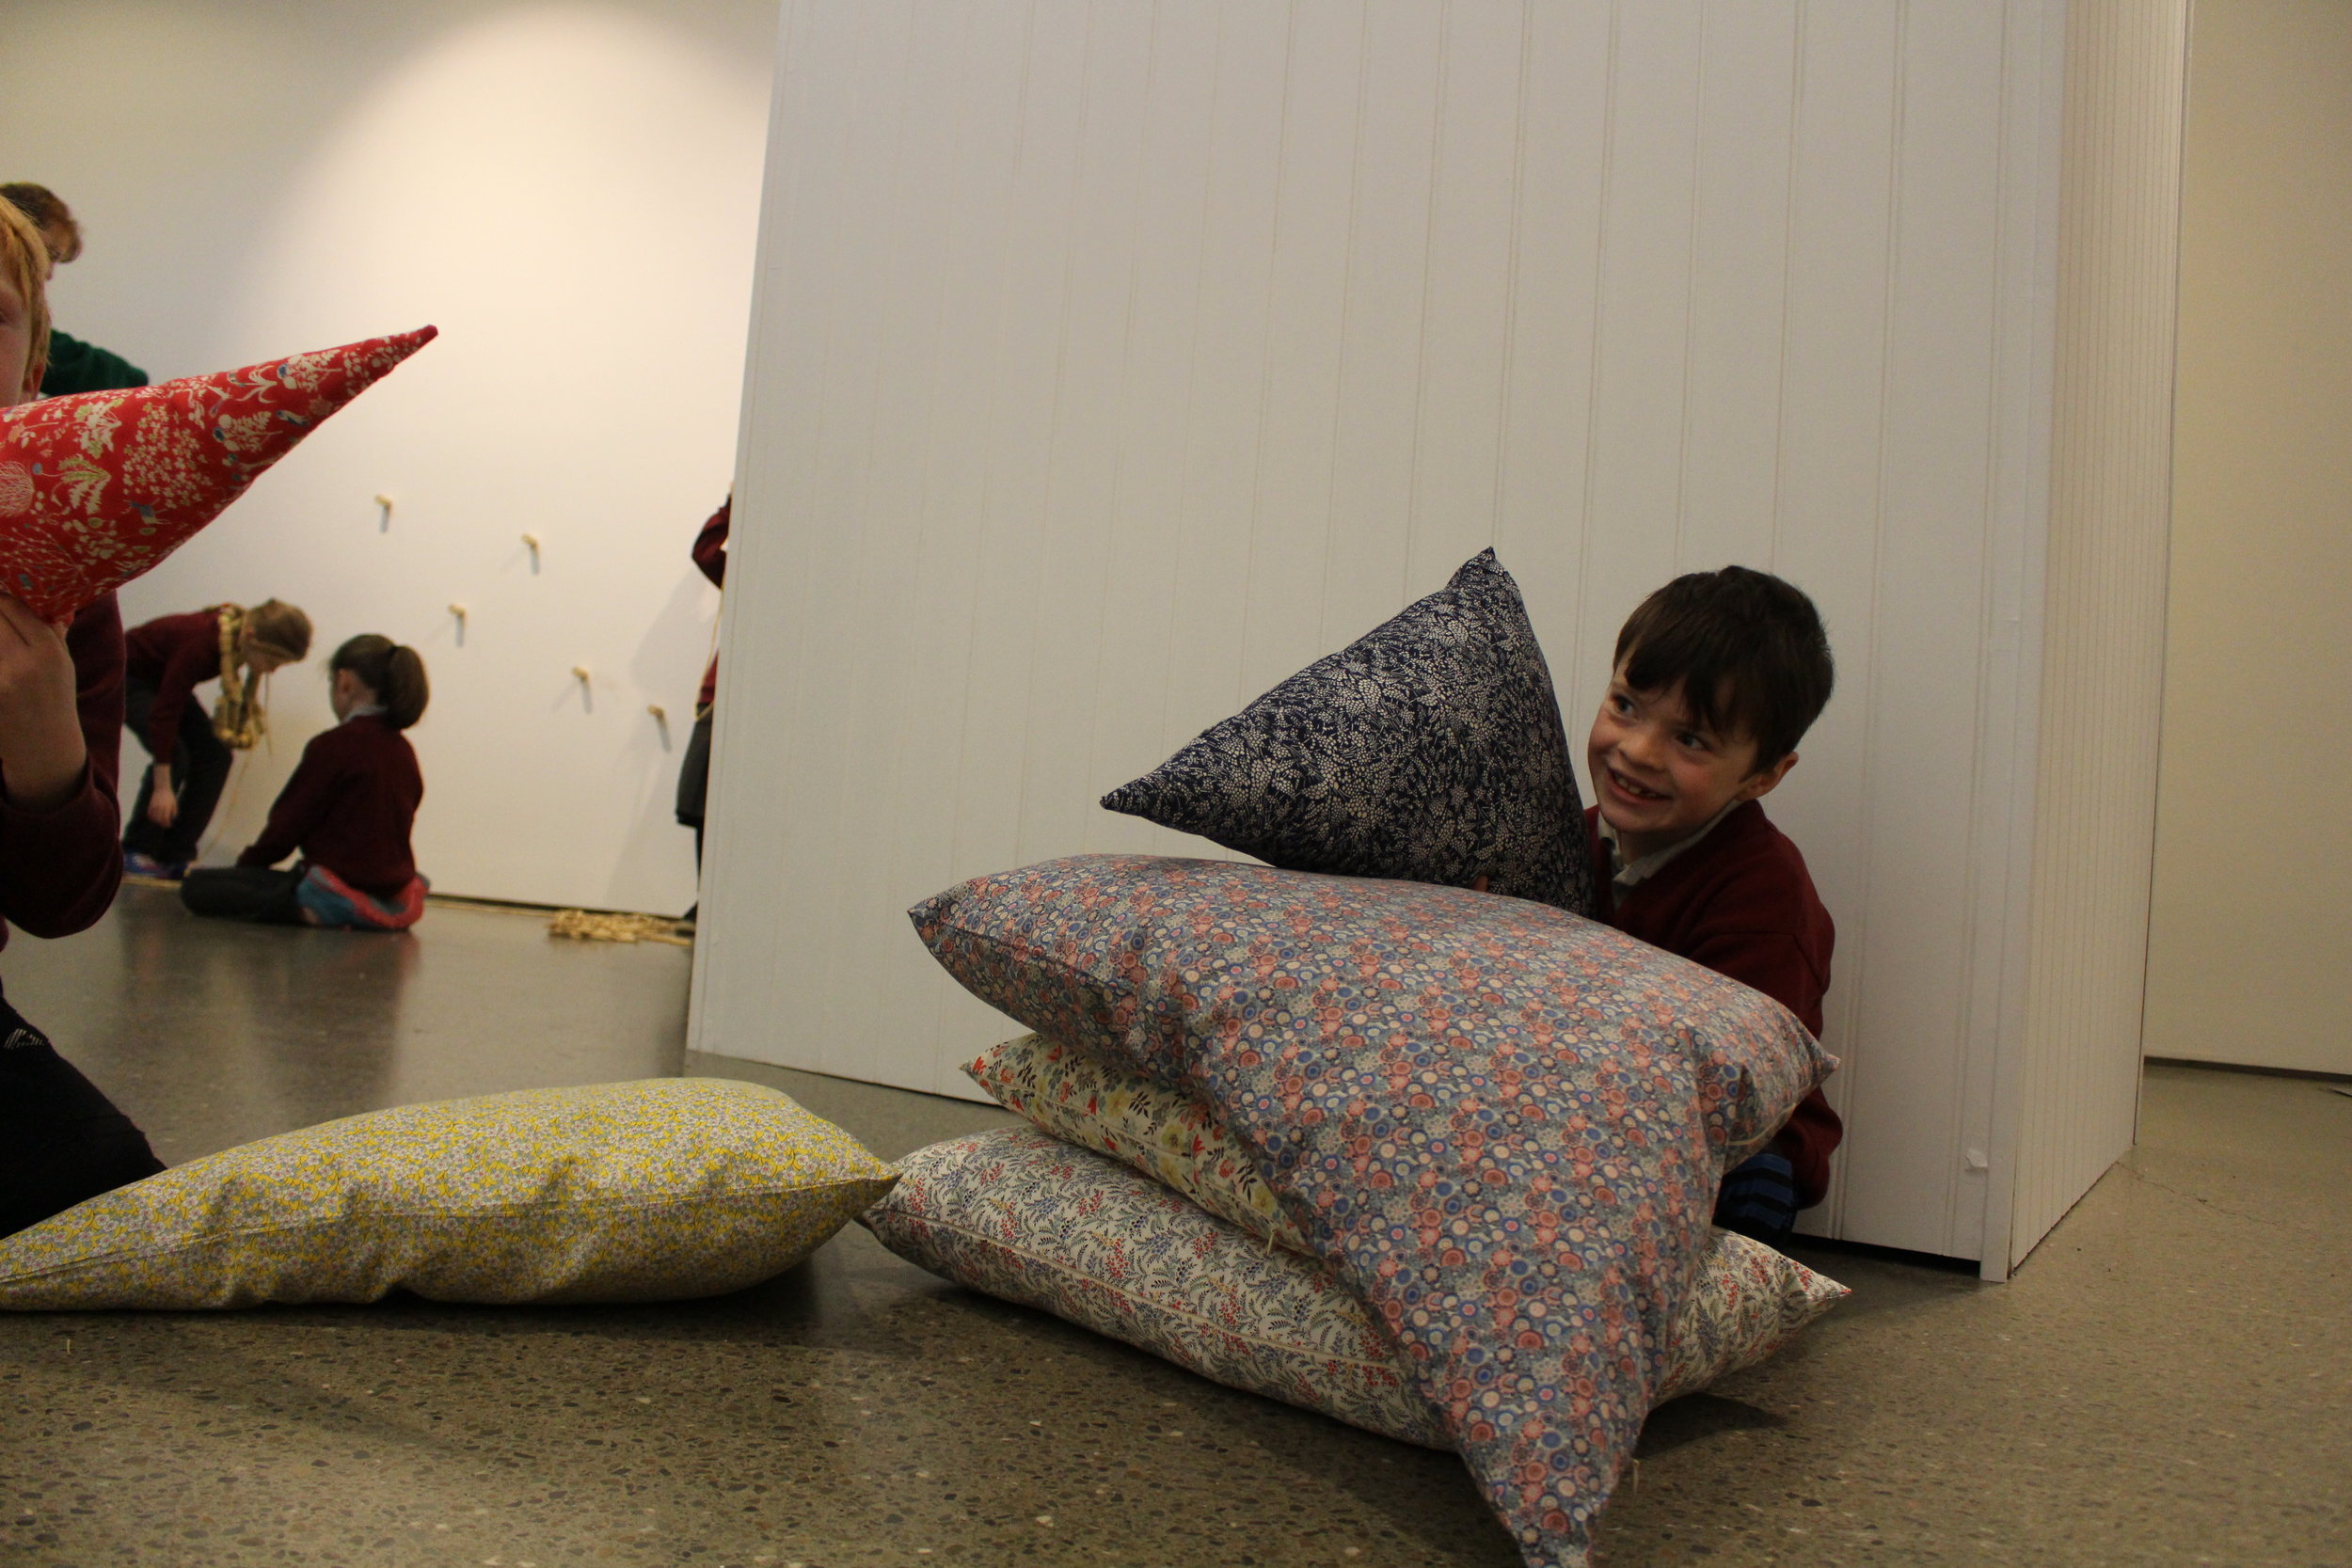  Students experienced some of the ‘mobile elements’ of Caoimhe Kilfeahter’s work, including these cushions 